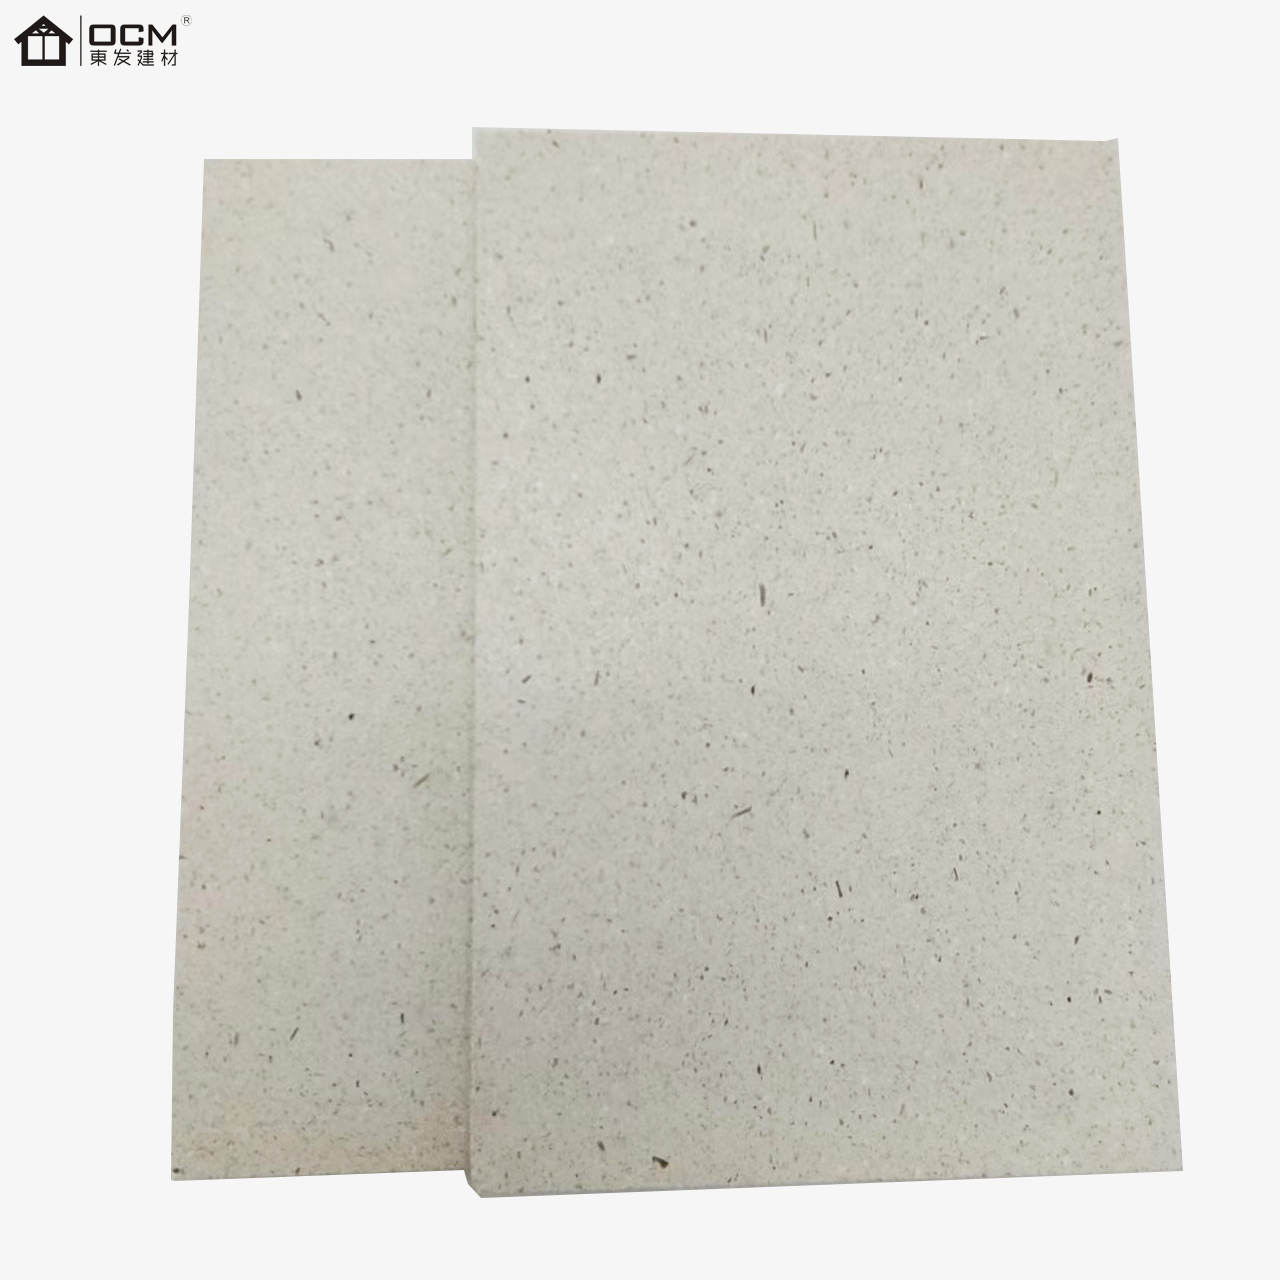 CE Certificate Hight Density Fireproof Sulfate Sanded Mgo Board